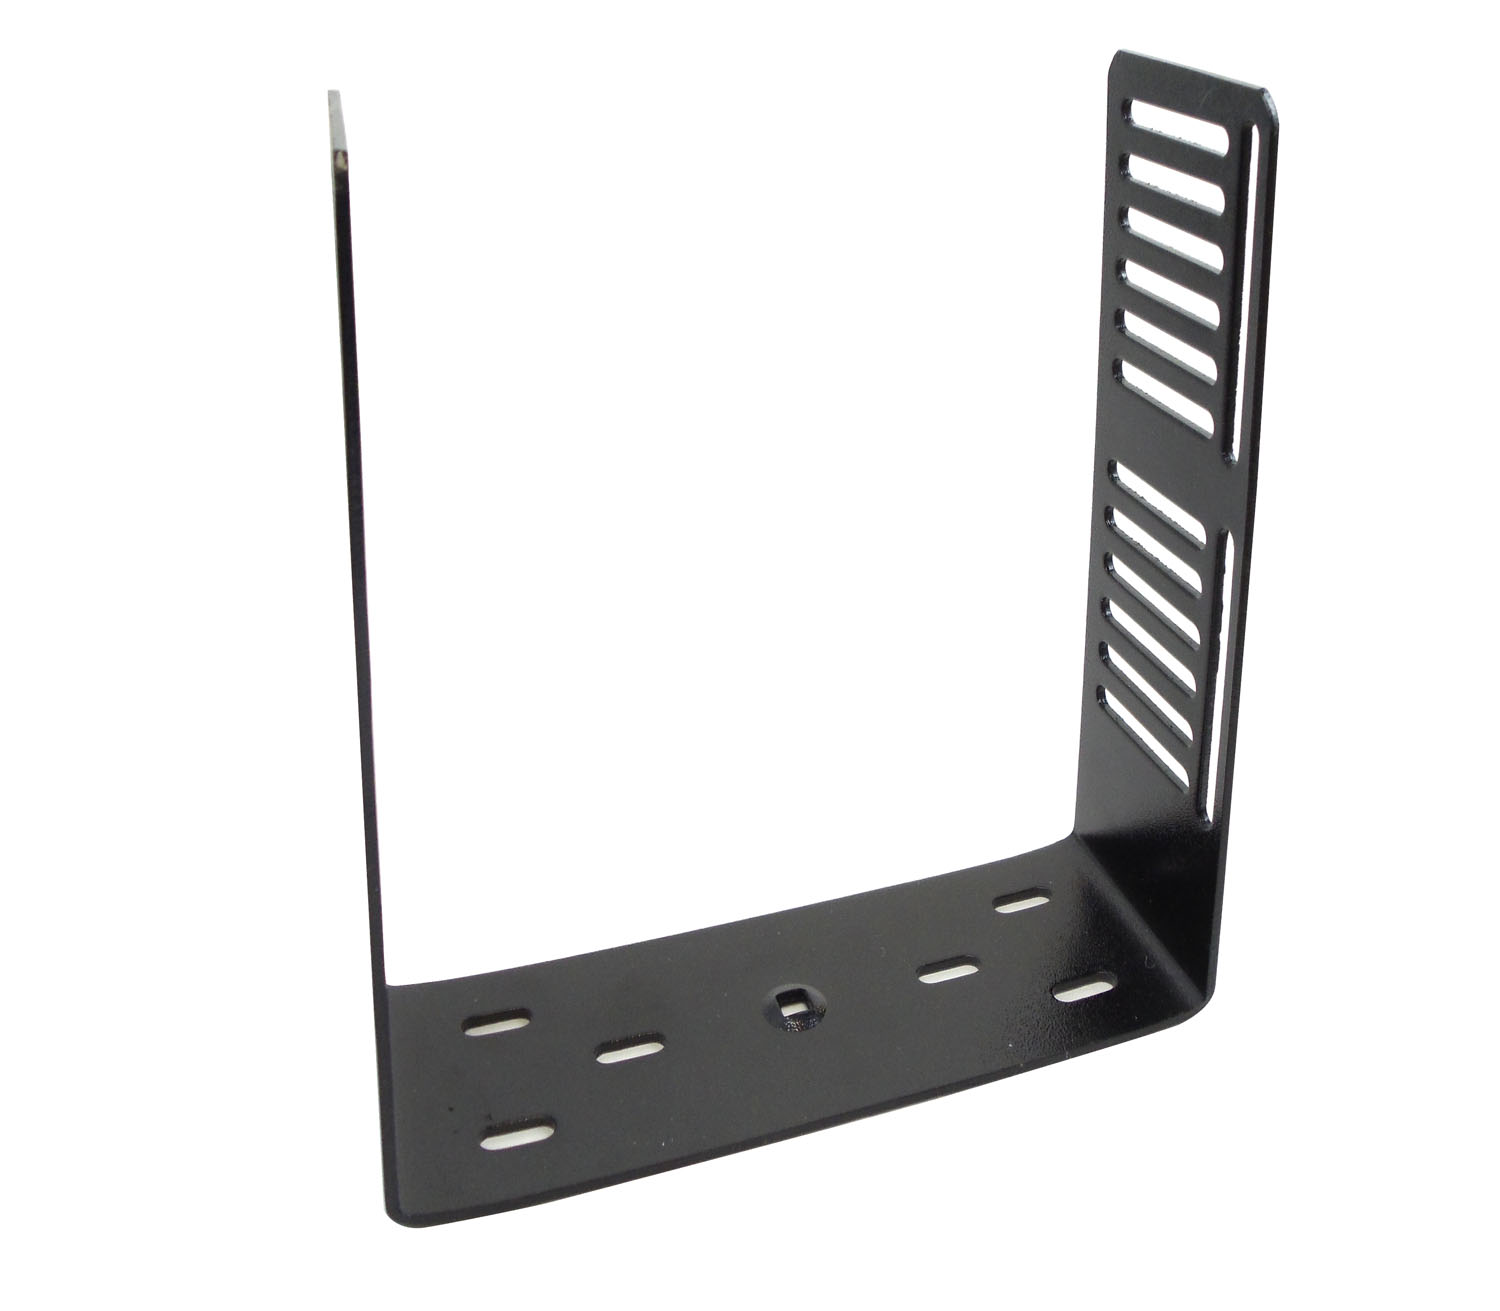 Deep H/D 9" Bracket For Mounting 2 Dx Radios